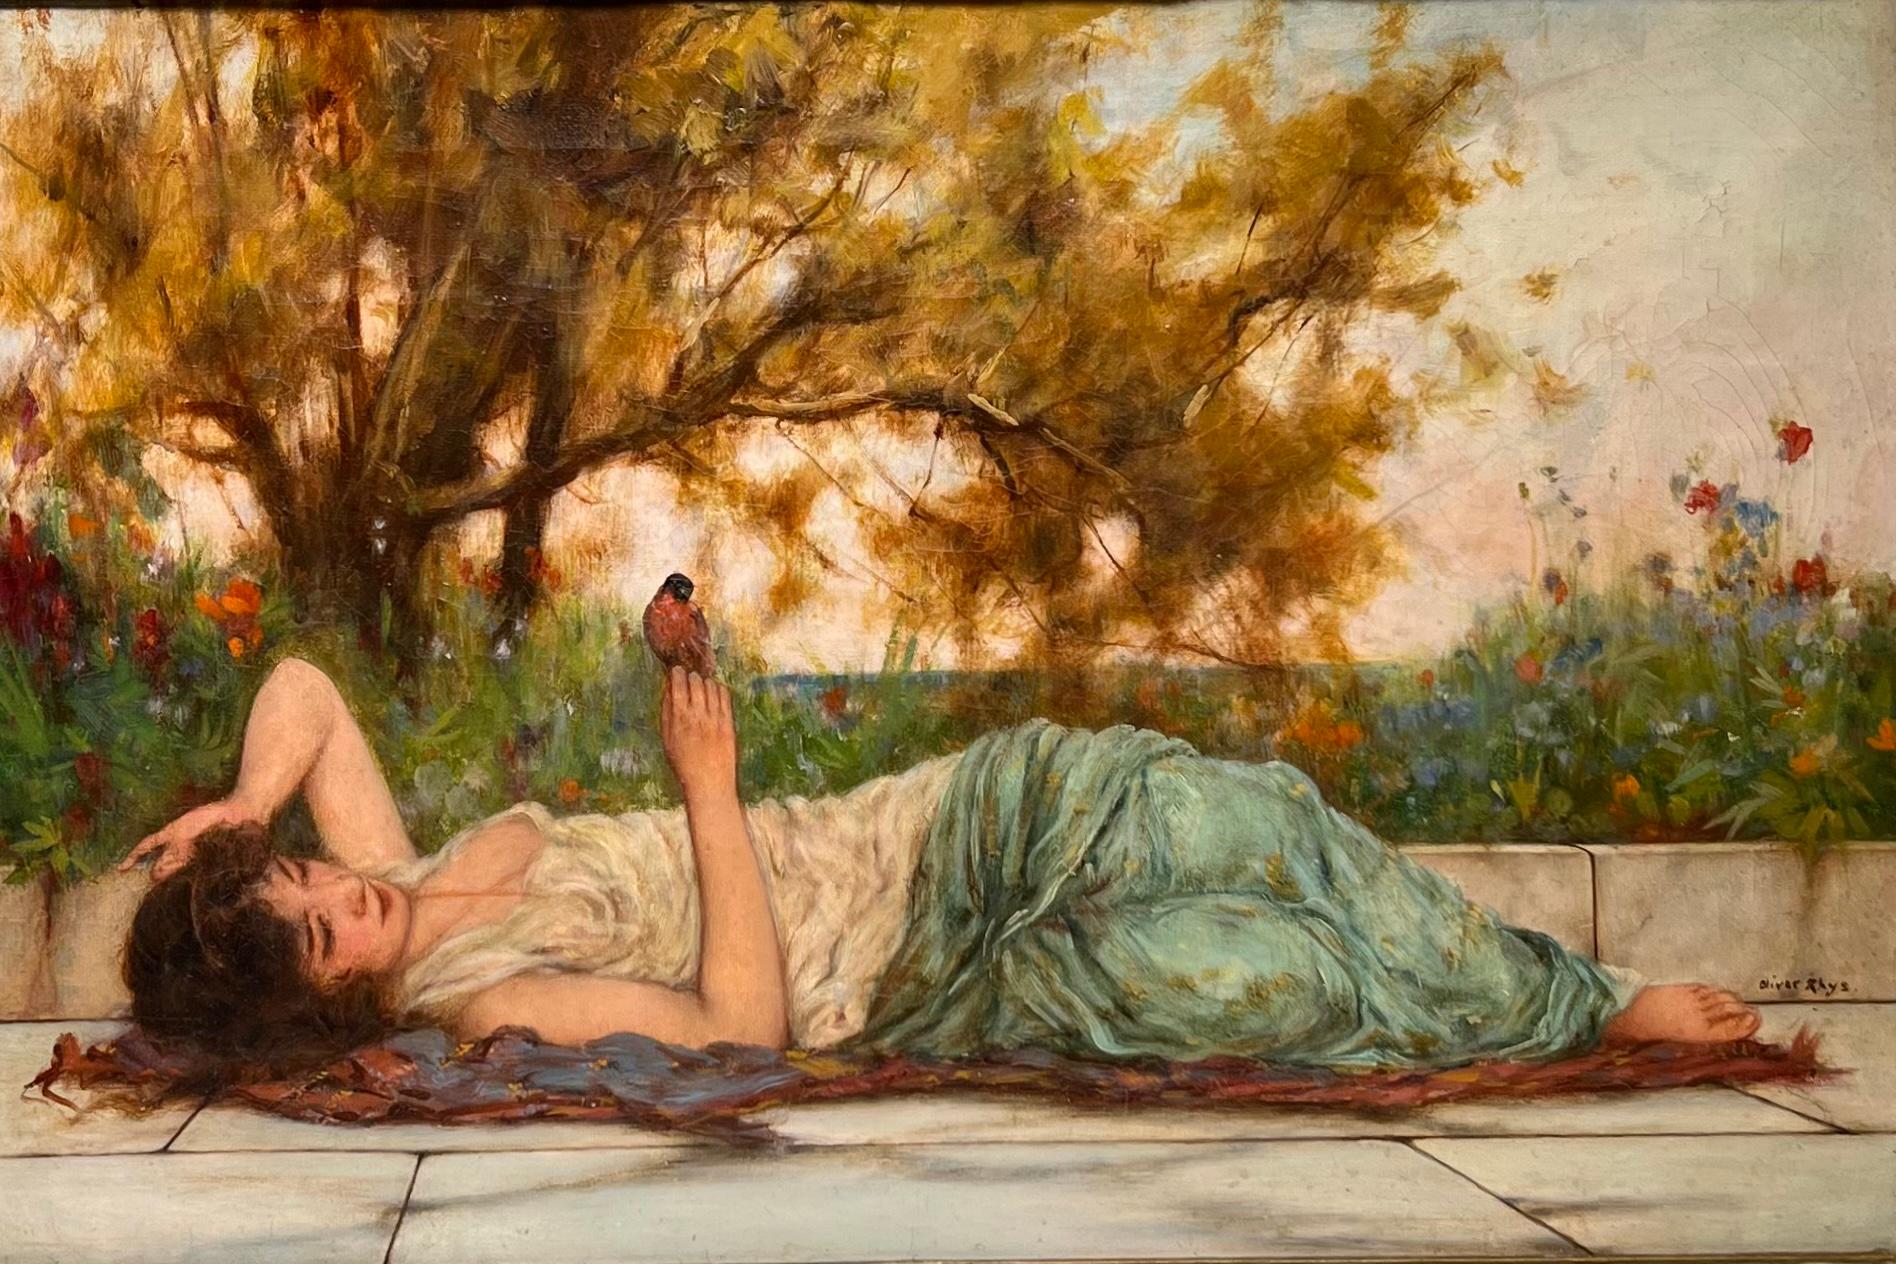 Oliver Rhys (1876-1893) was an important English 19th century Pre-Raphealite Academic painter known for paintings of Grecian woman.

His paintings have sold in sothebys and Christie’s well Over $30,000.

The painting for sale depicts a Grecian woman